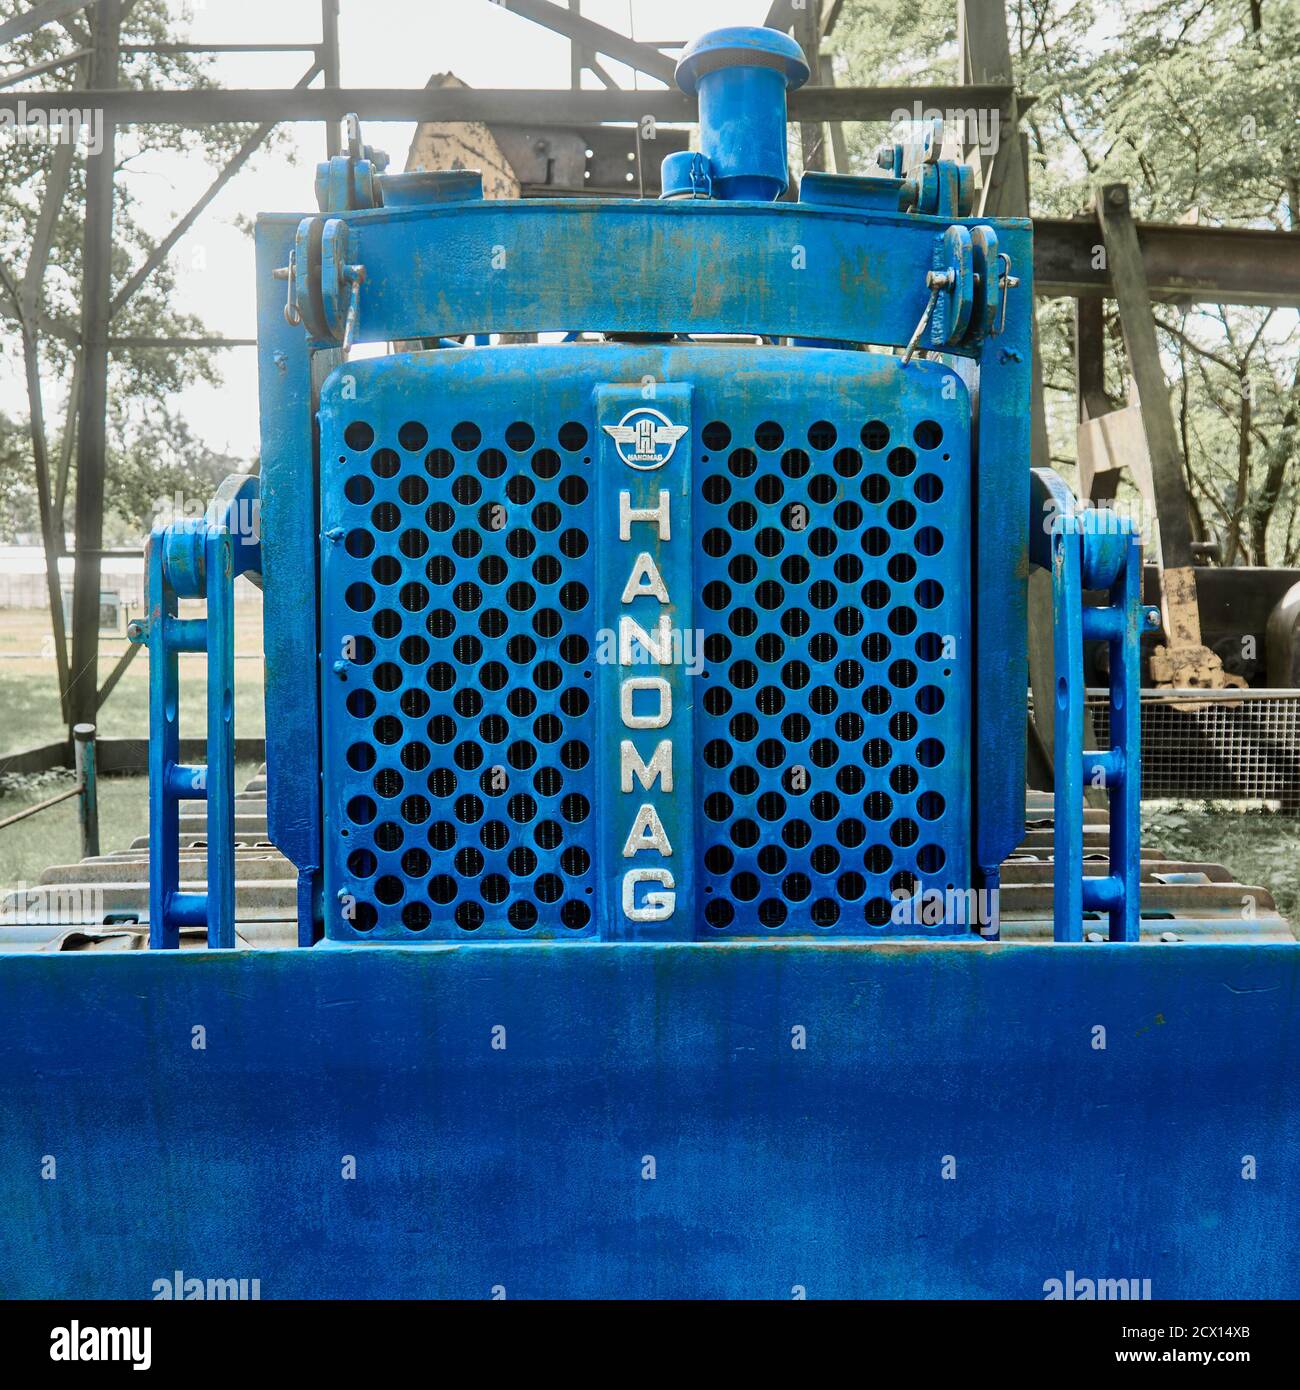 Wietze, Germany, September 10., 2020: Blue Hanomag machine for driving a winch to move drill rods in the well during oil drilling Stock Photo